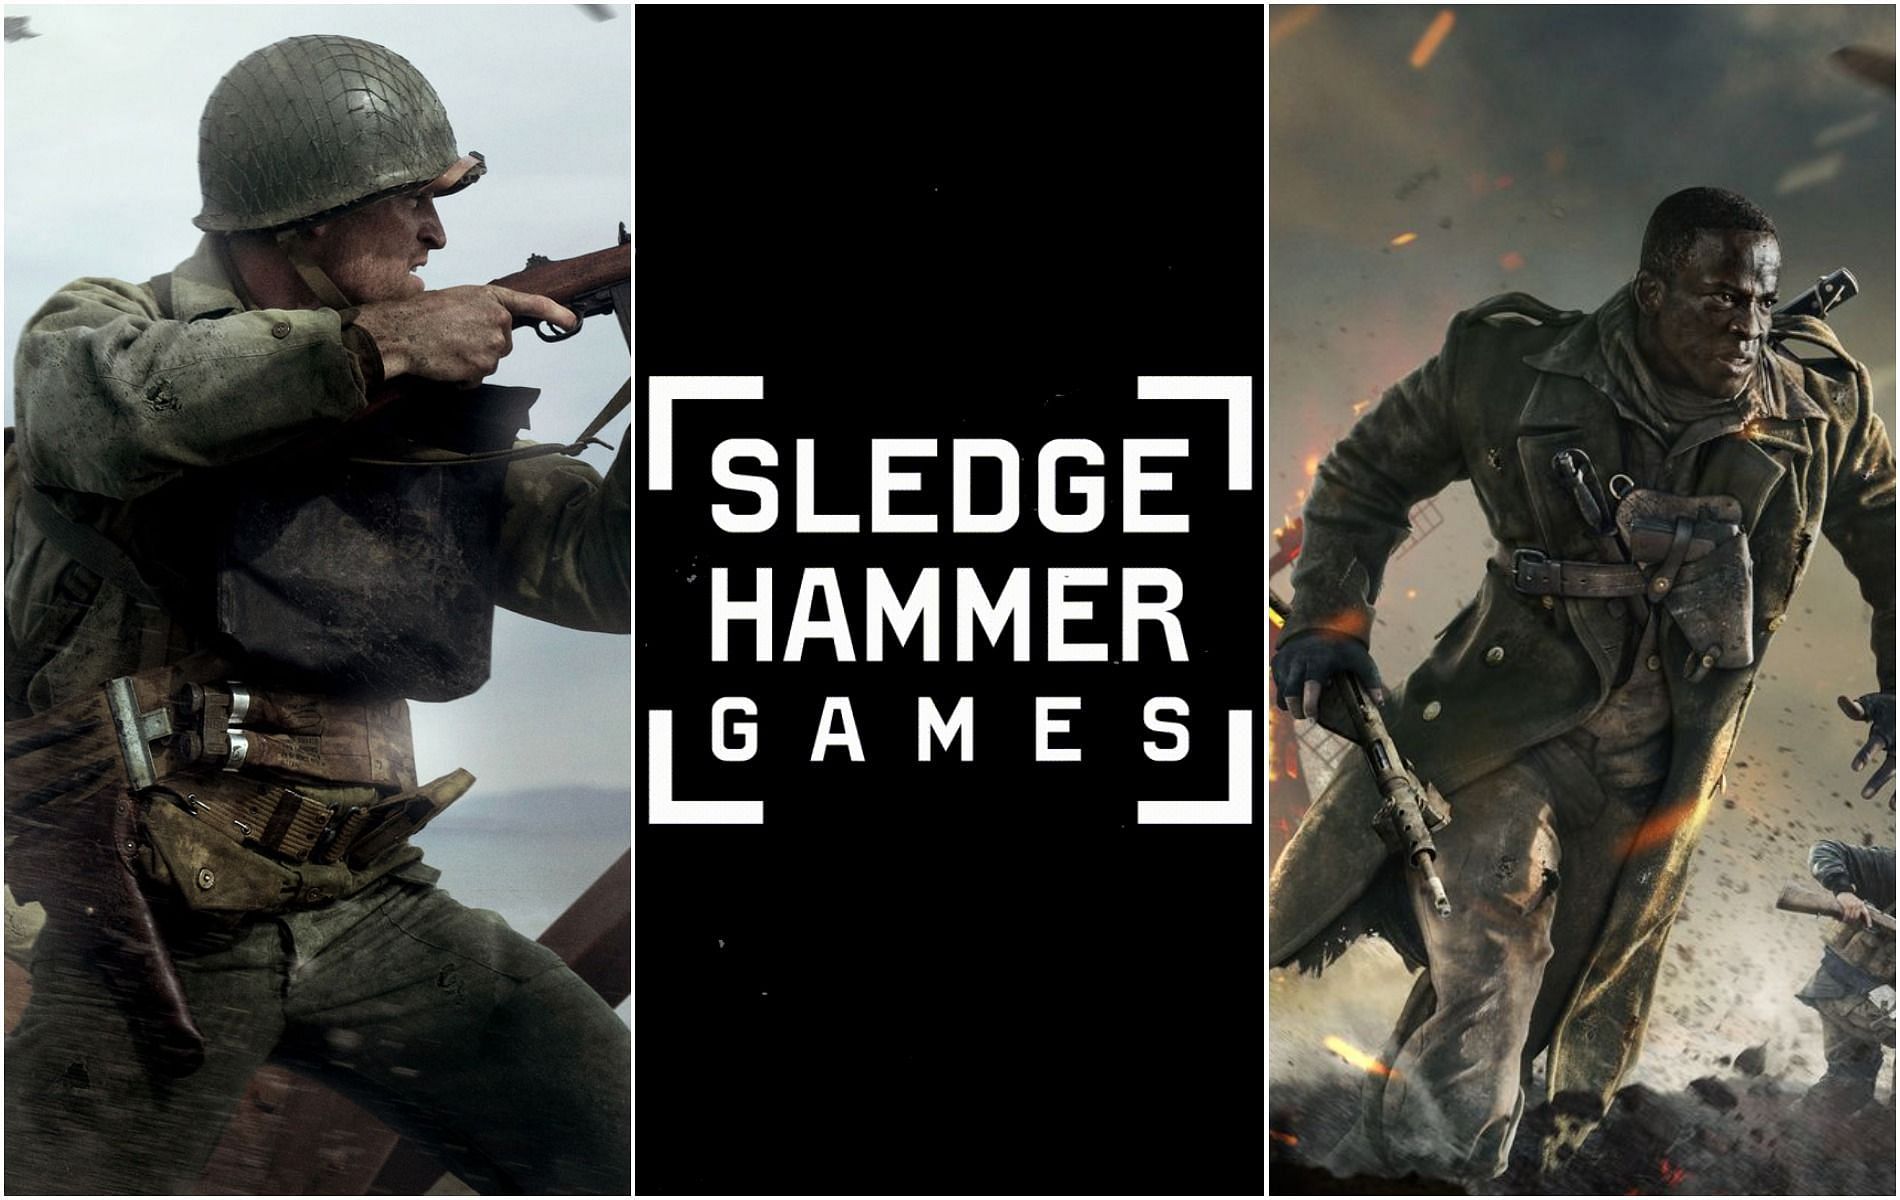 Sledgehammer Games has already started development for the next mainline title, and it is currently in the pre-production stage (Image by Activision)